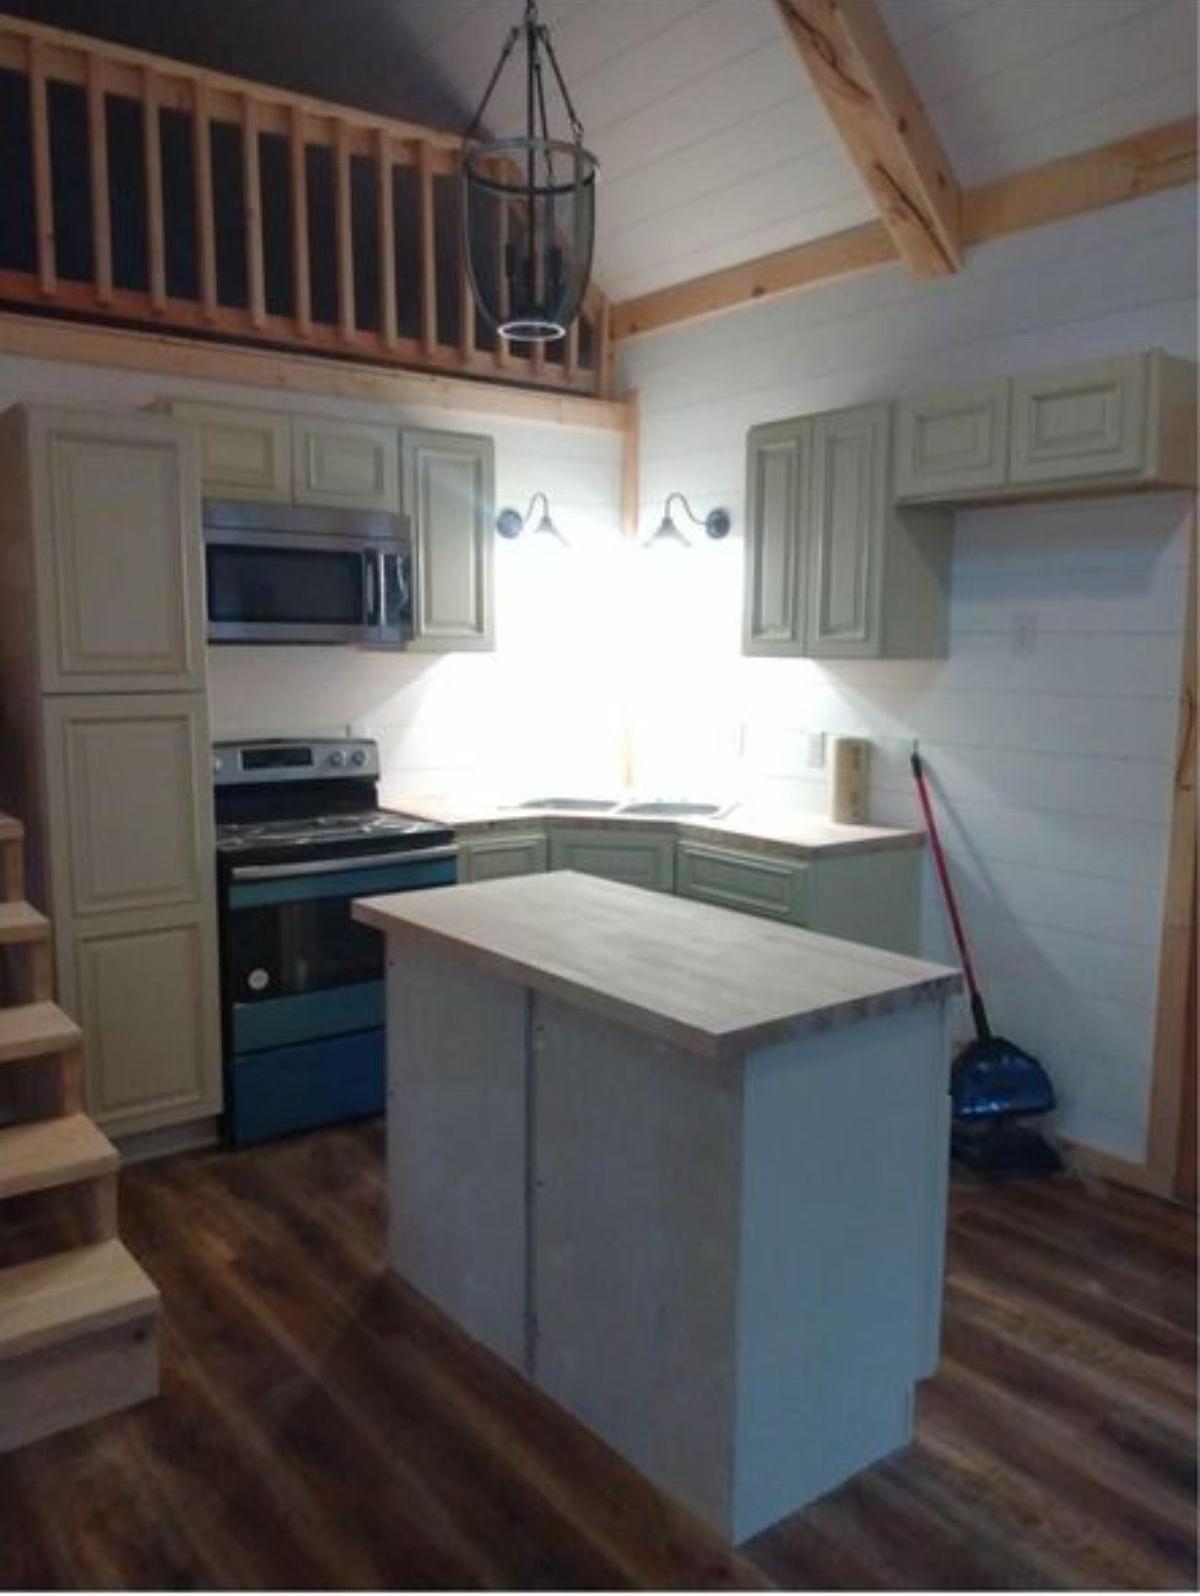 kitchen area of two story cabin home